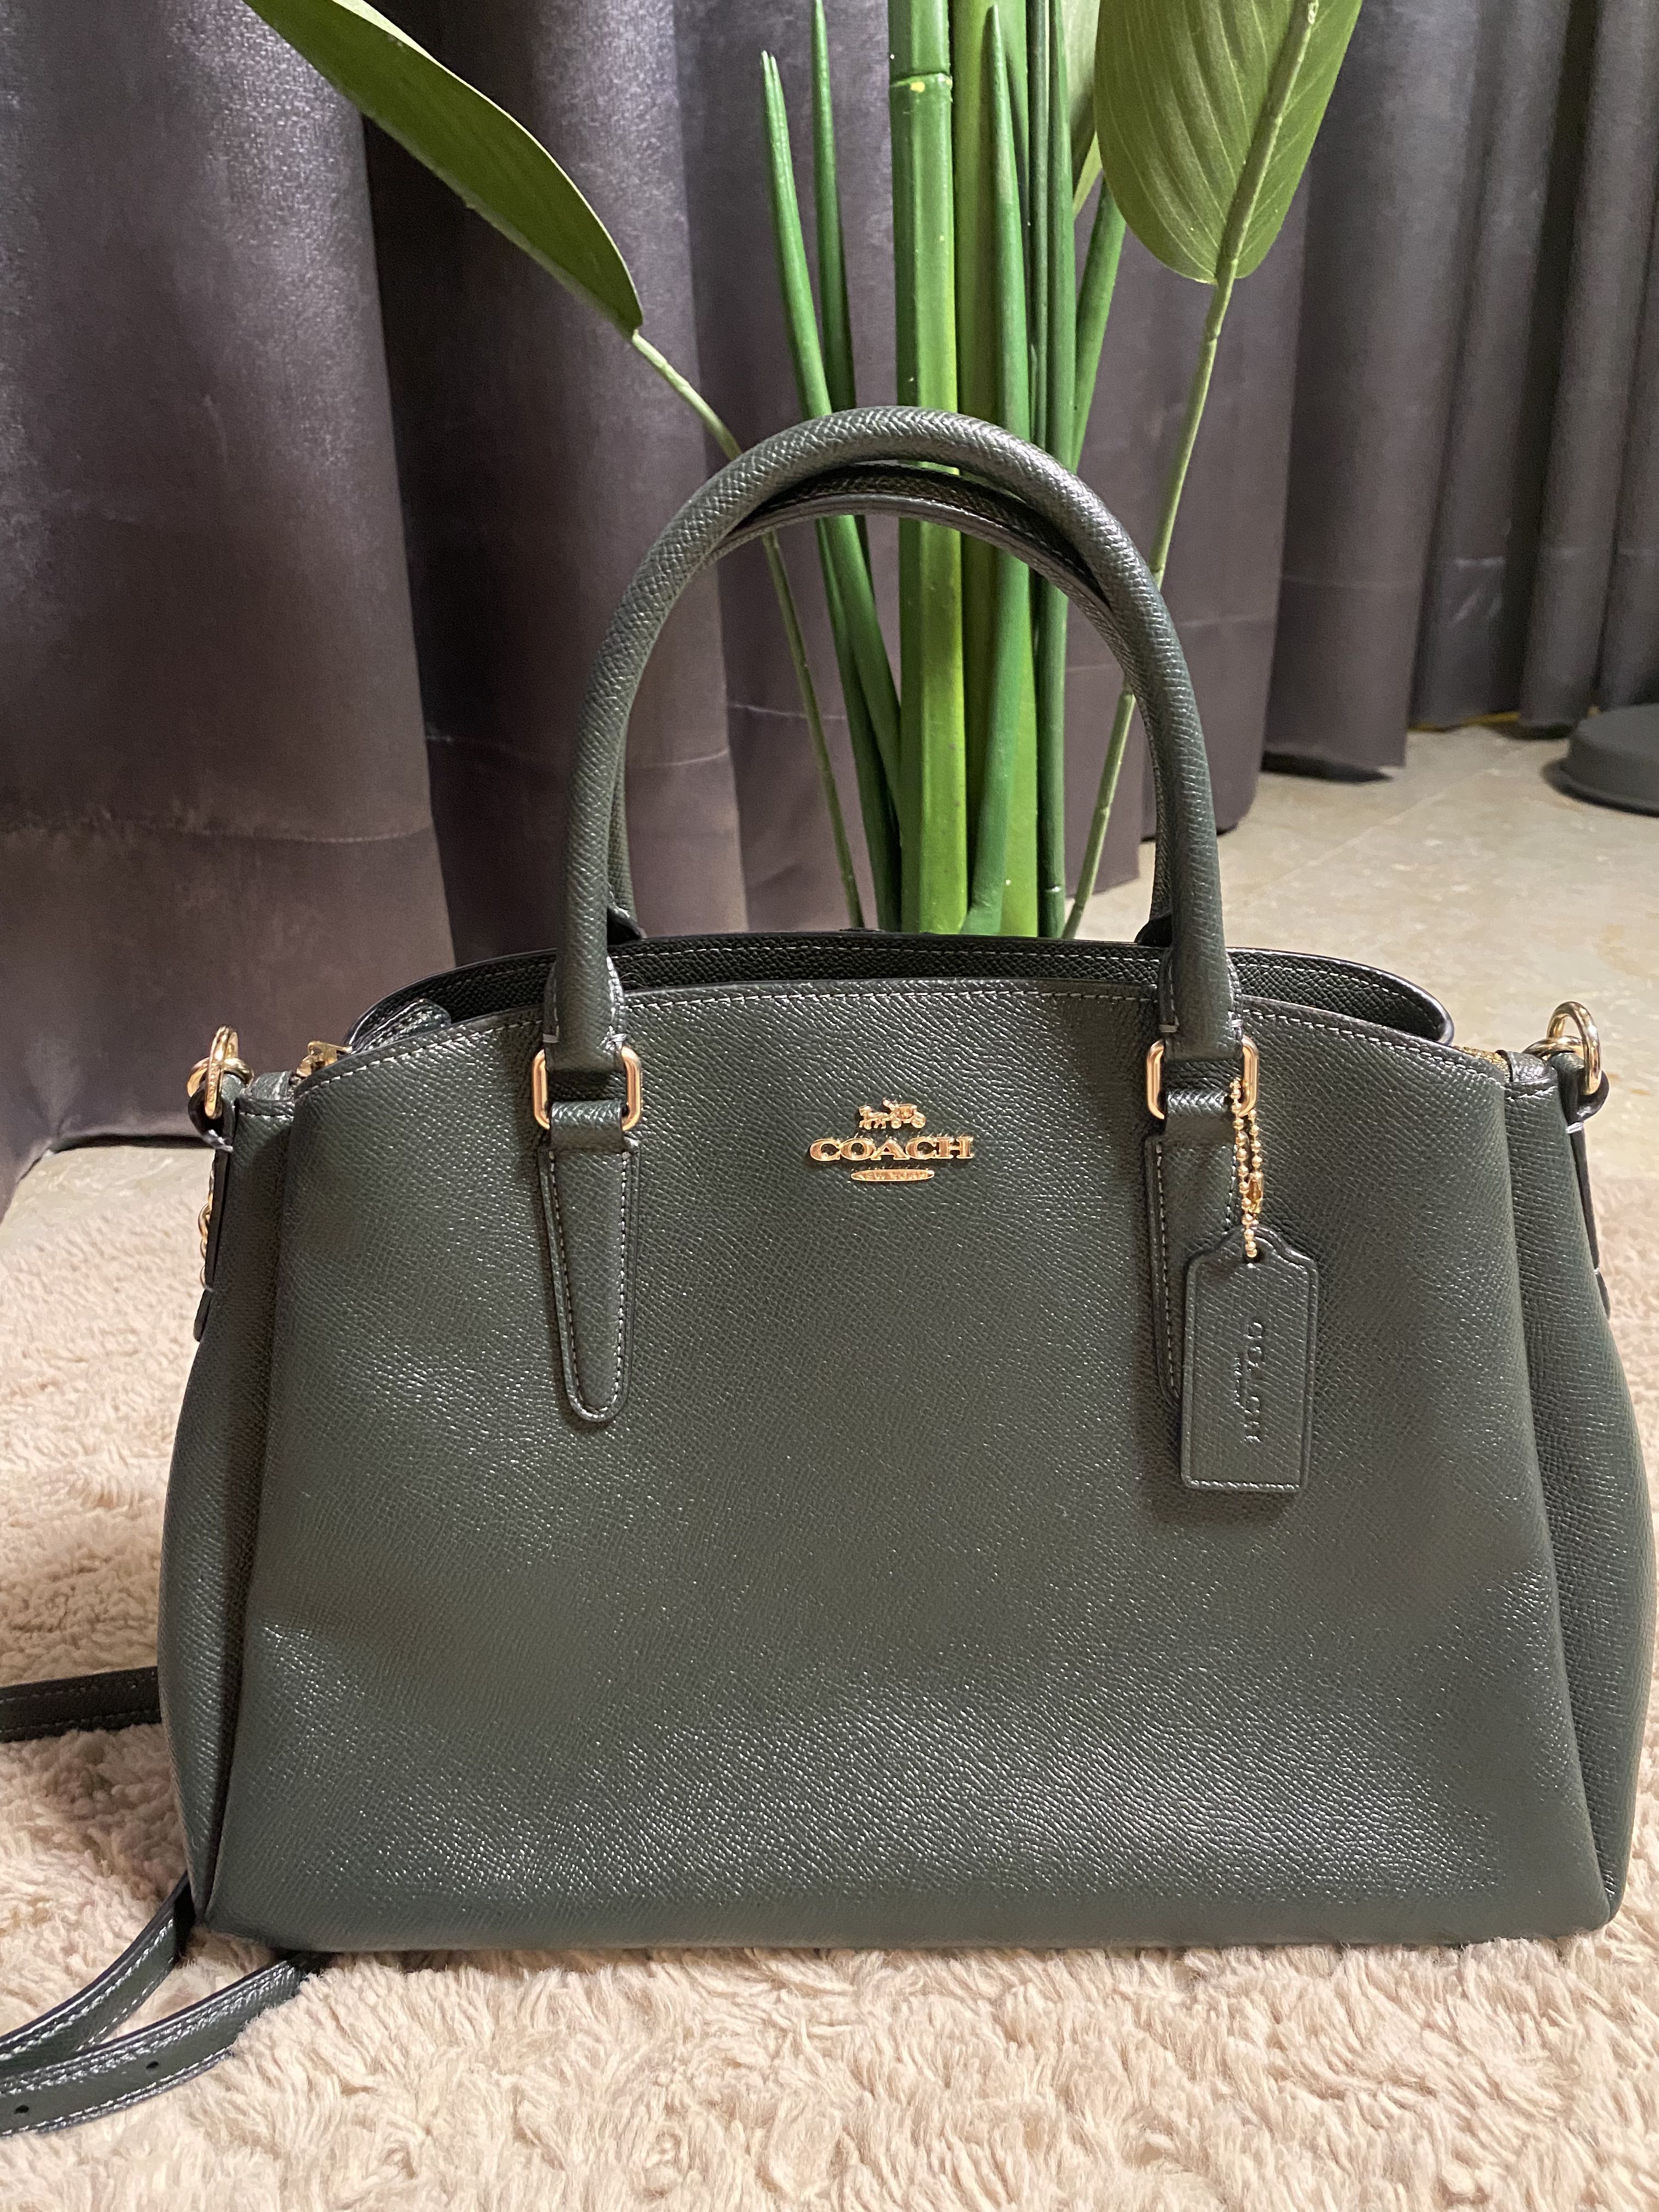 Pillow tabby leather handbag Coach Green in Leather - 39605260